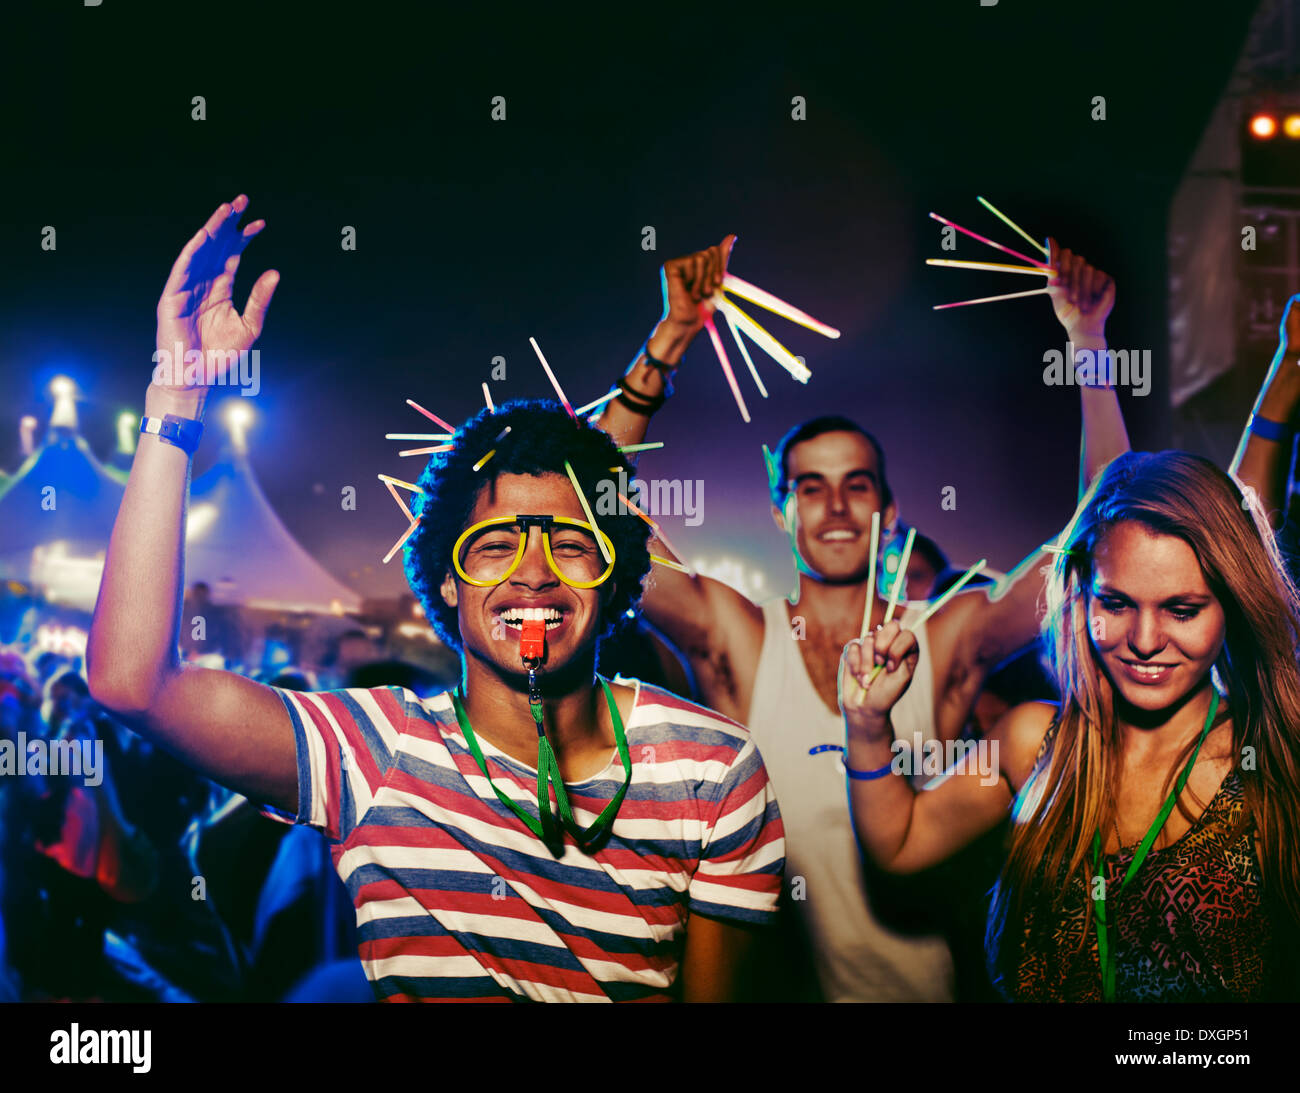 Fans with glow sticks cheering at music festival Stock Photo